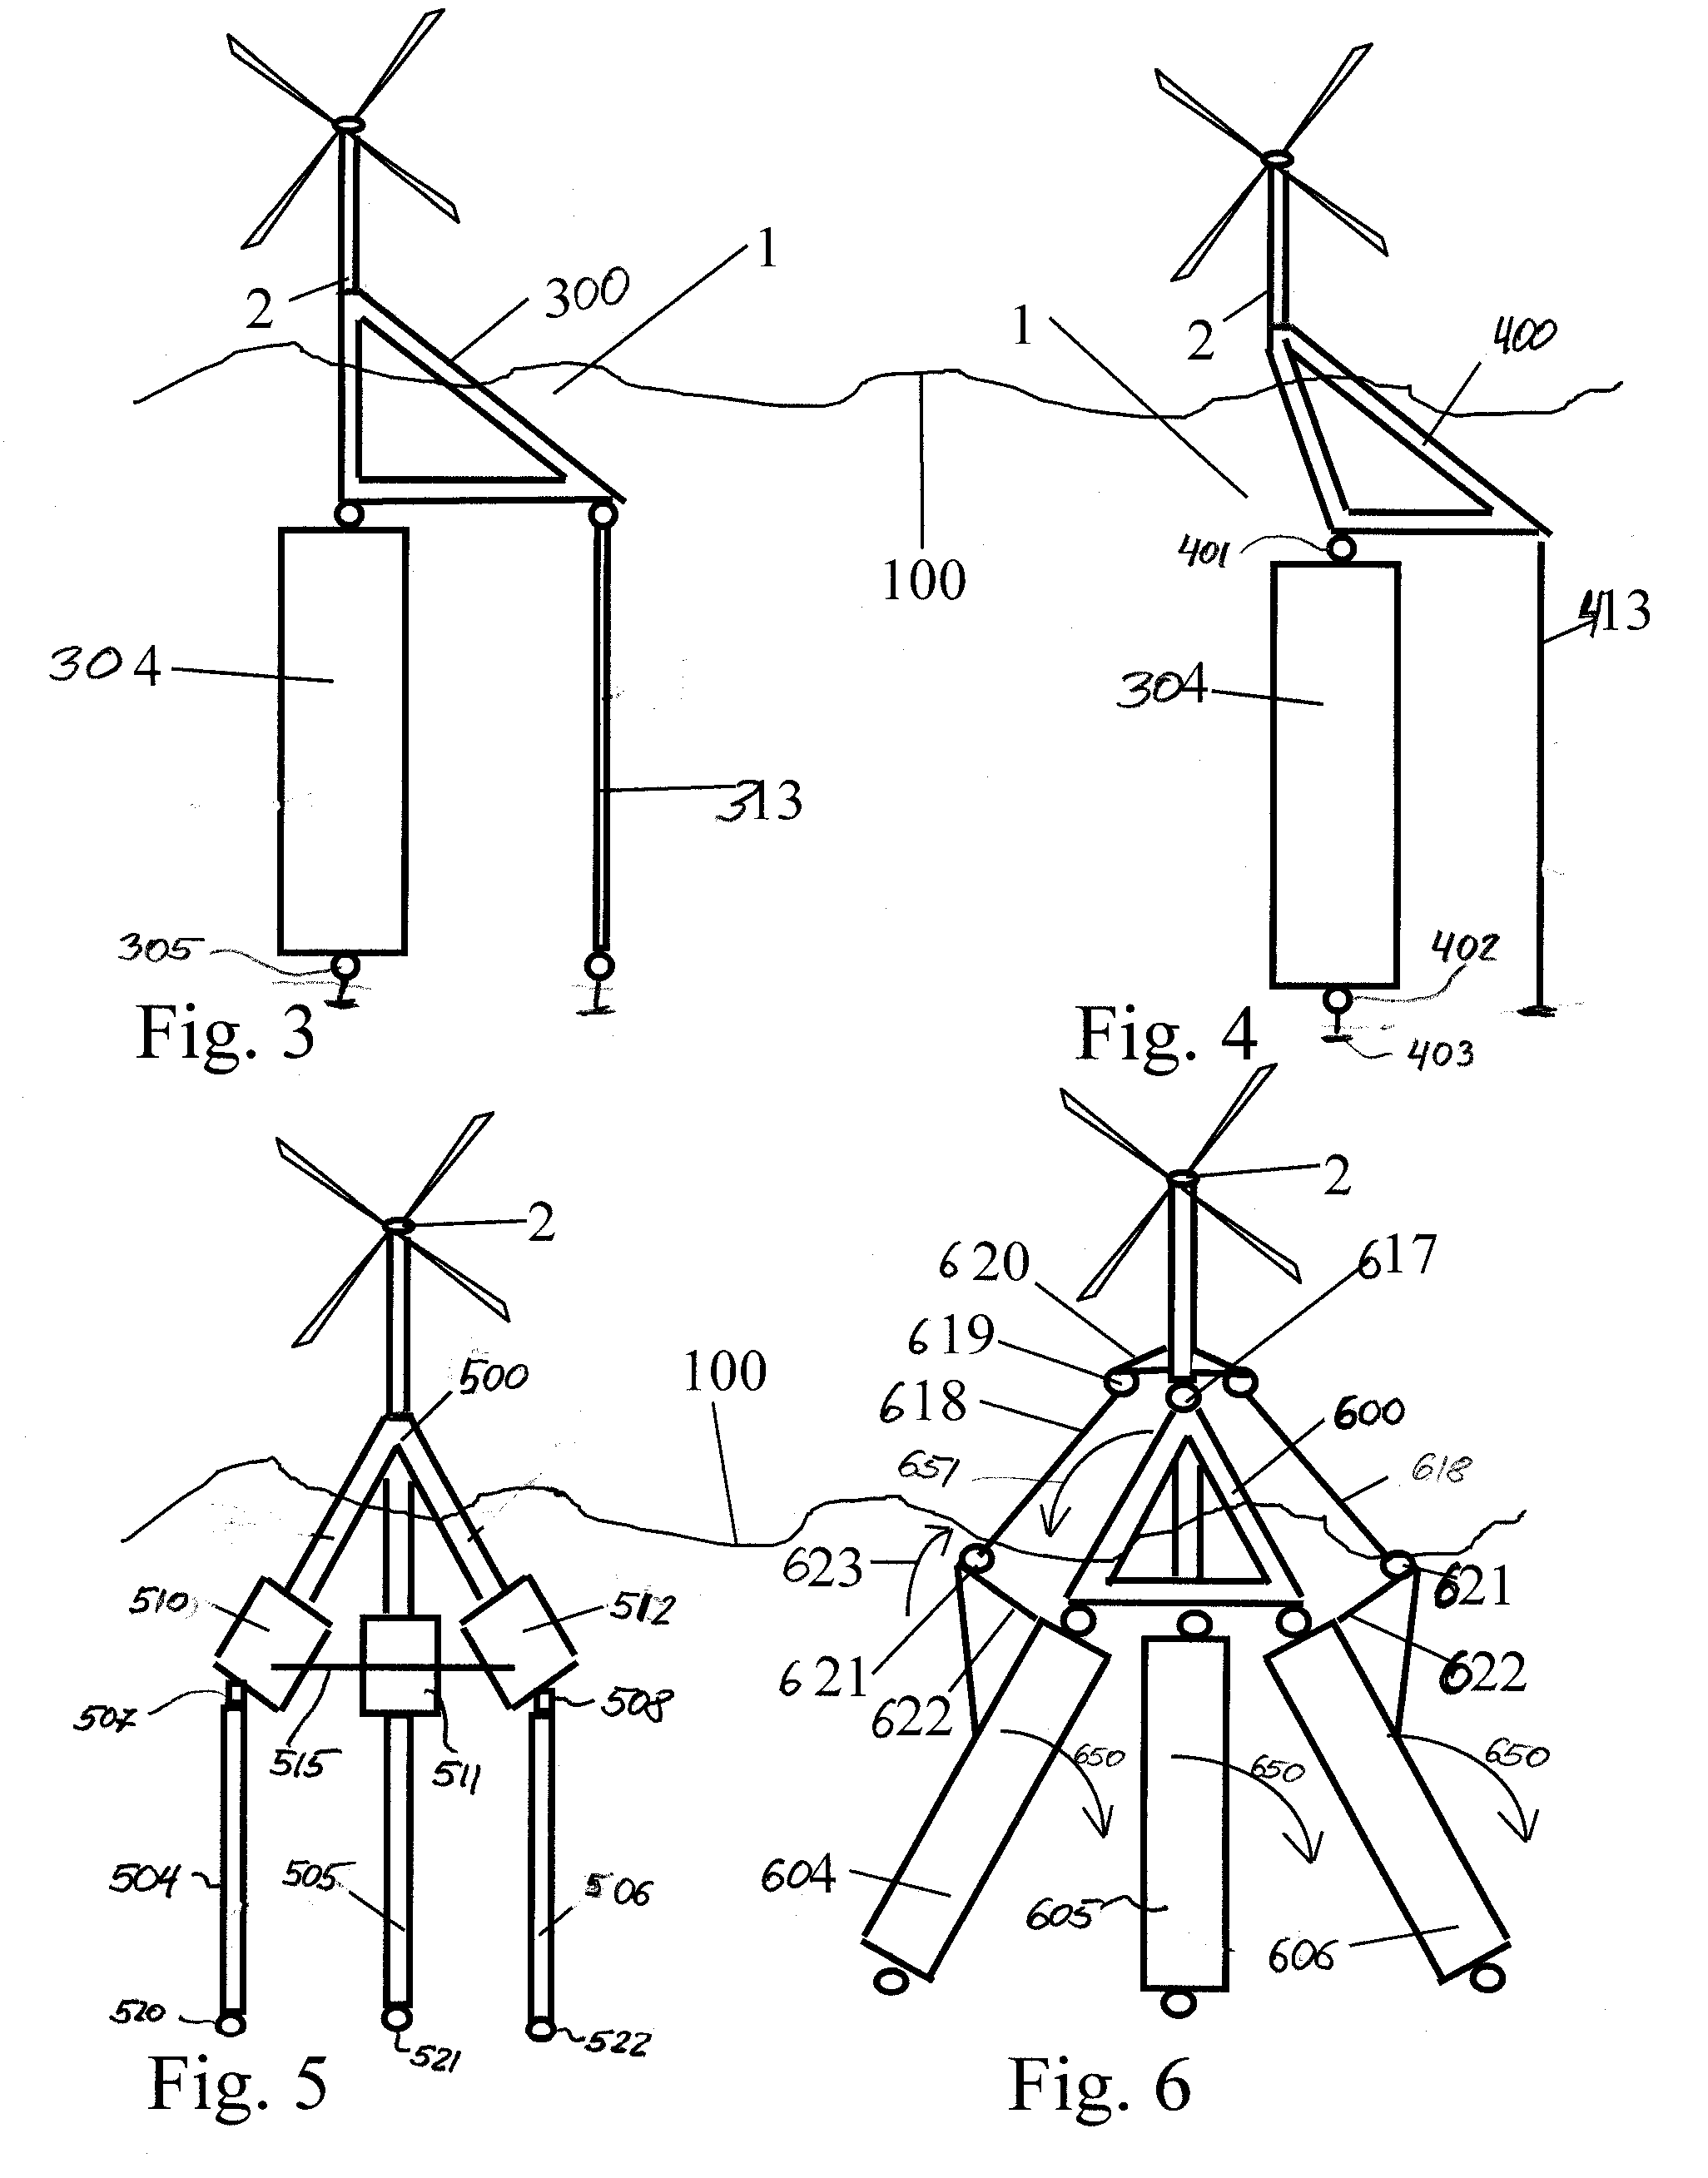 System and method for mounting equipment and structures offshore